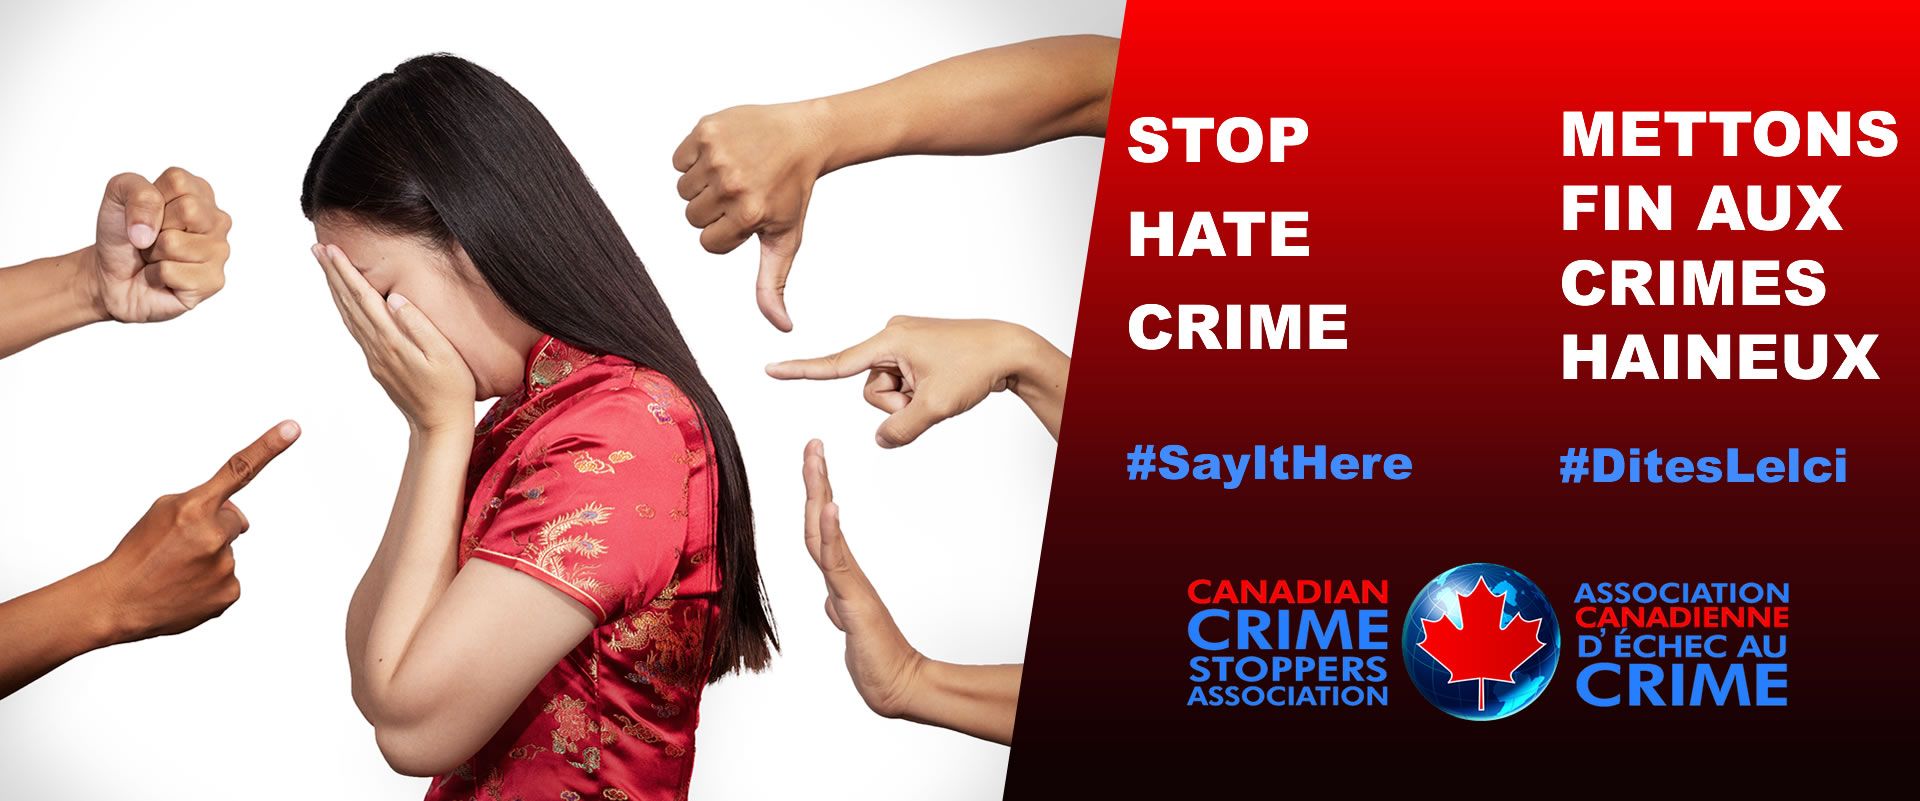 STOP HATE CRIME